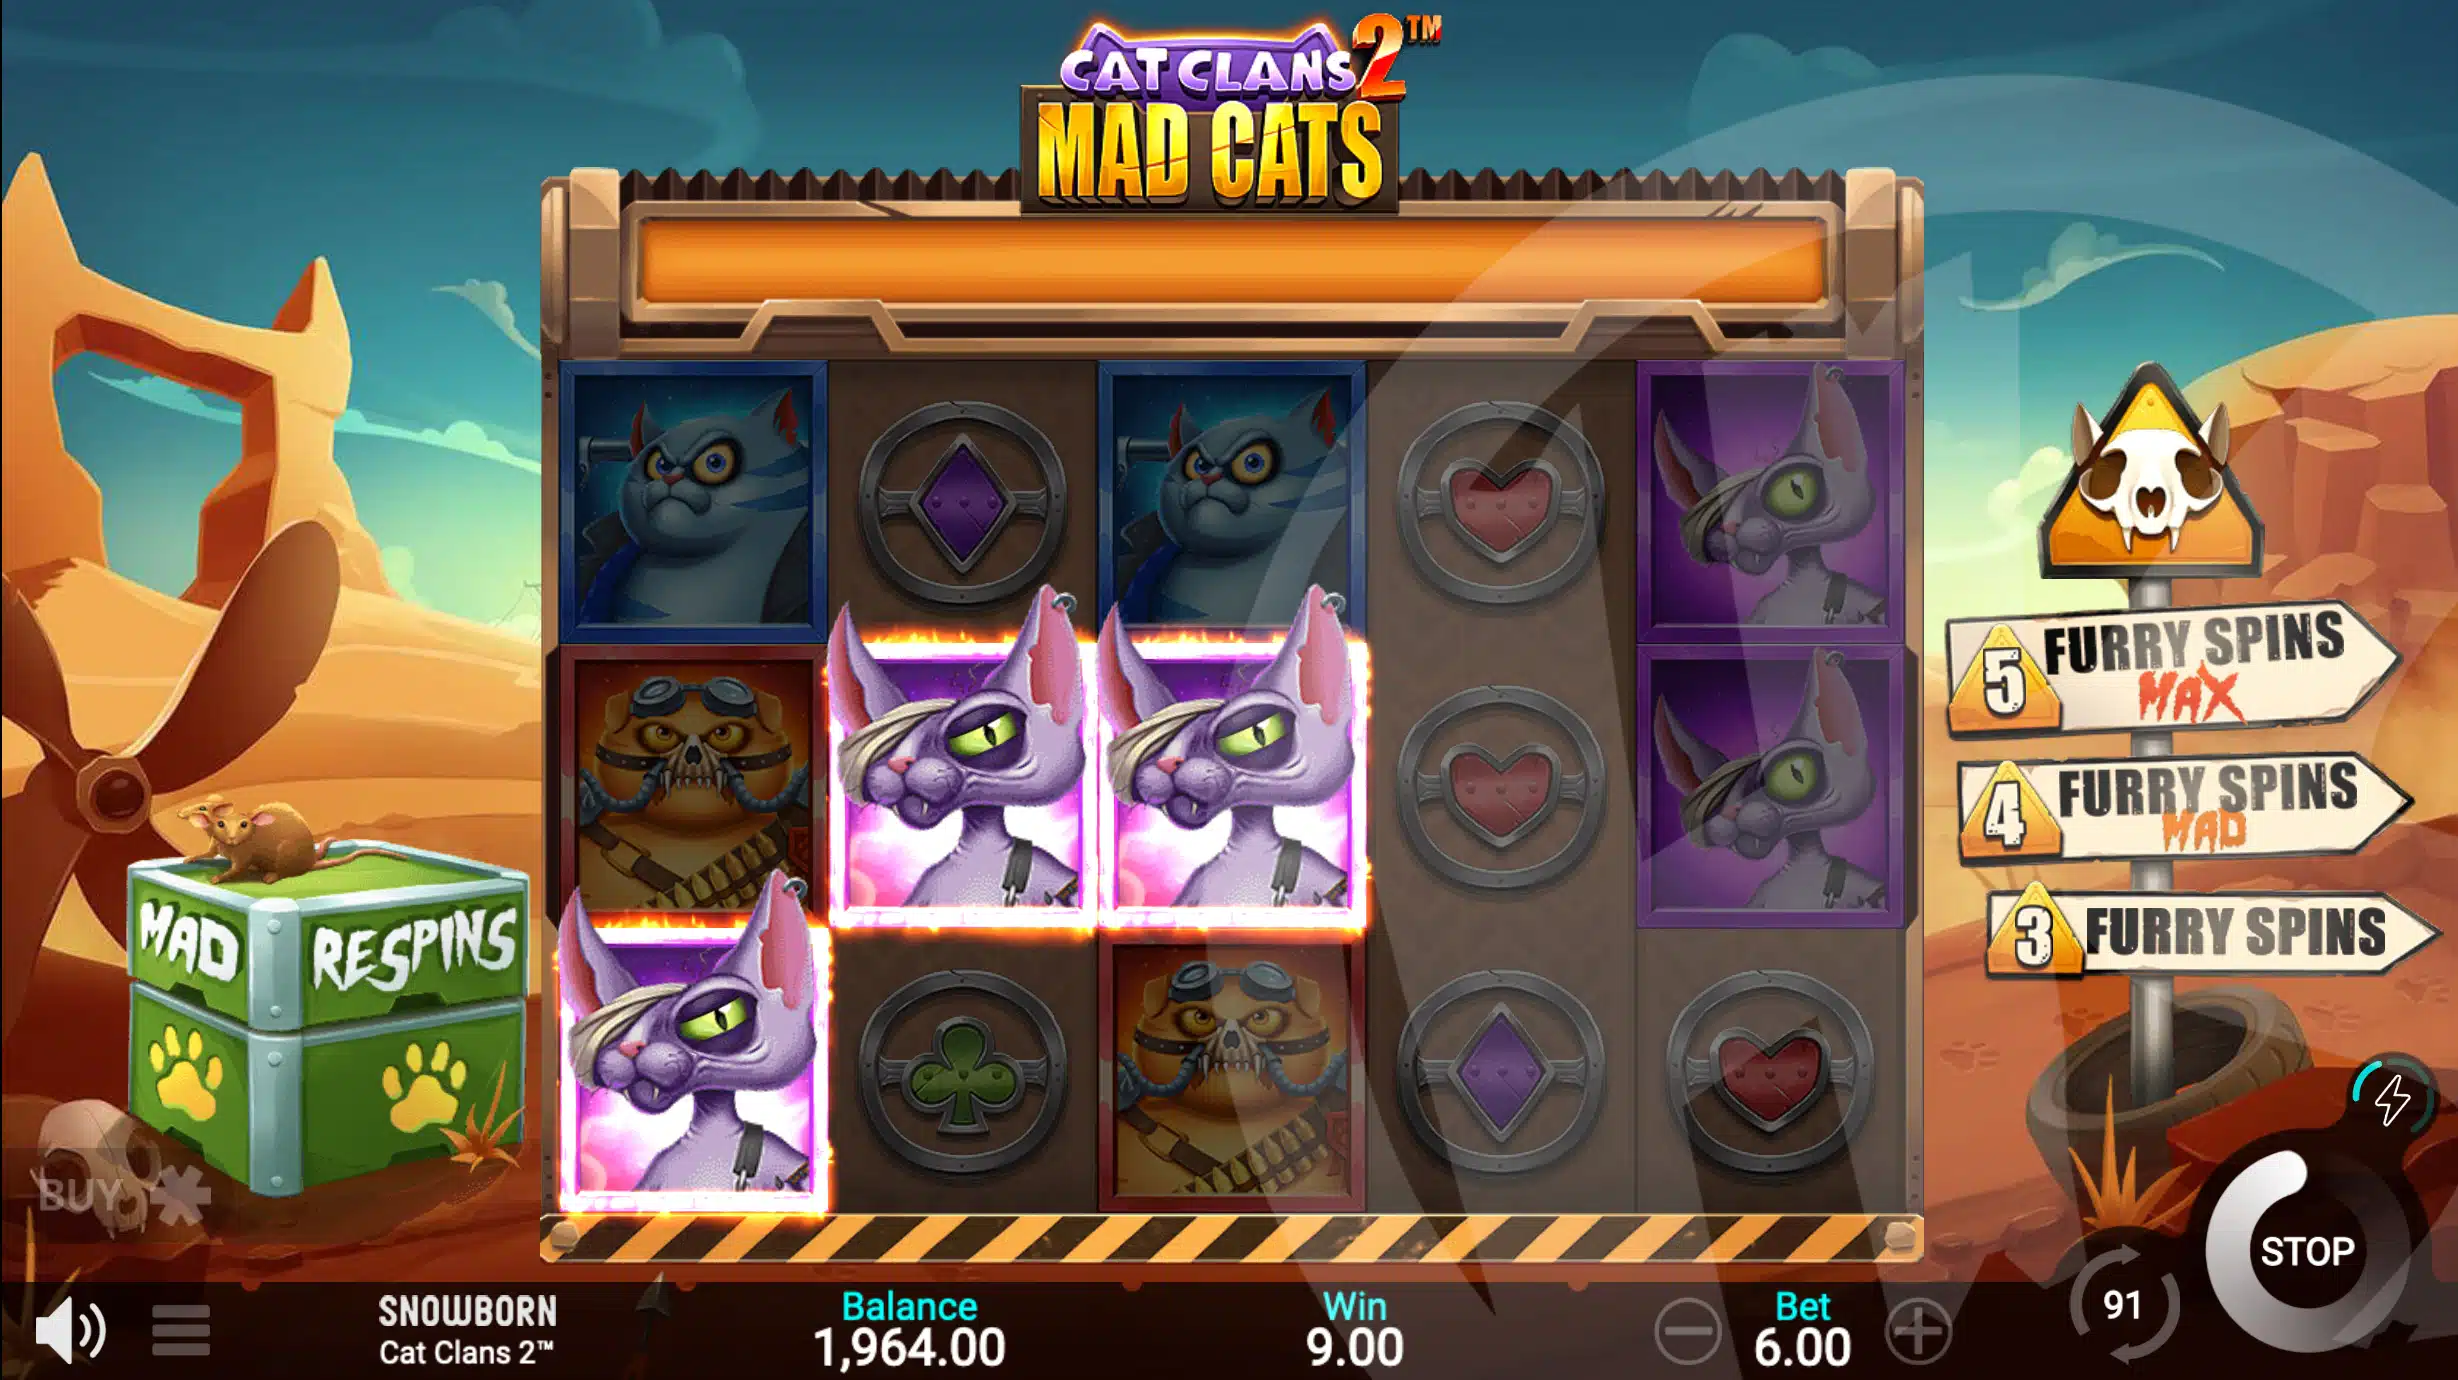 Cat Clans 2 Mad Cats Offers Players 20 Fixed Win Lines